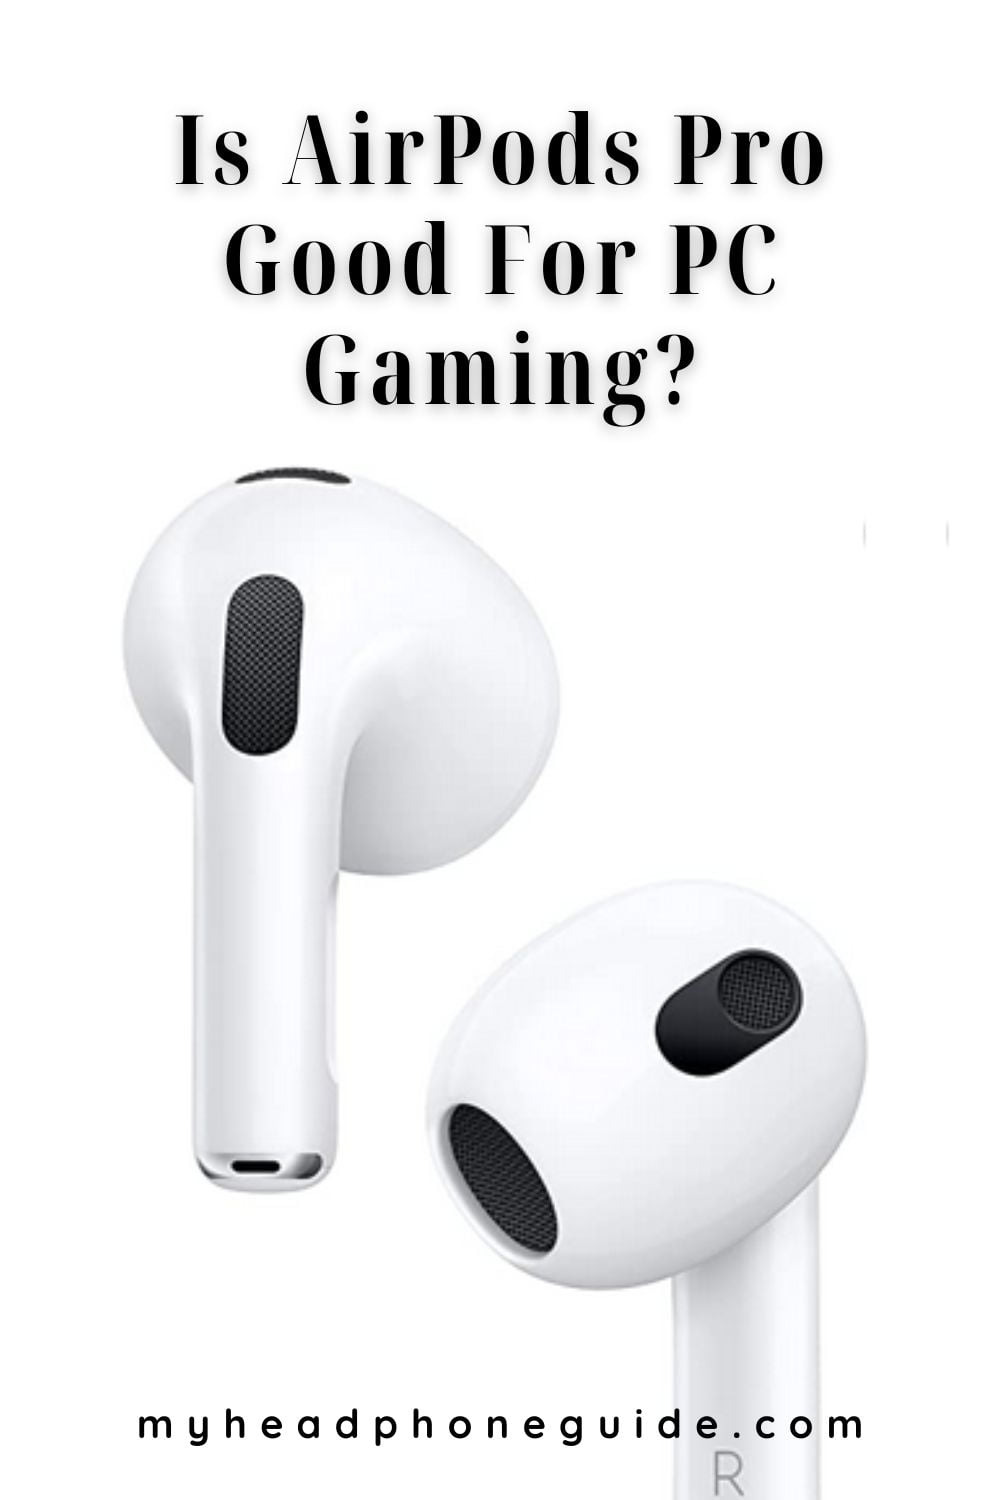 Is AirPods Pro Good For PC Gaming?